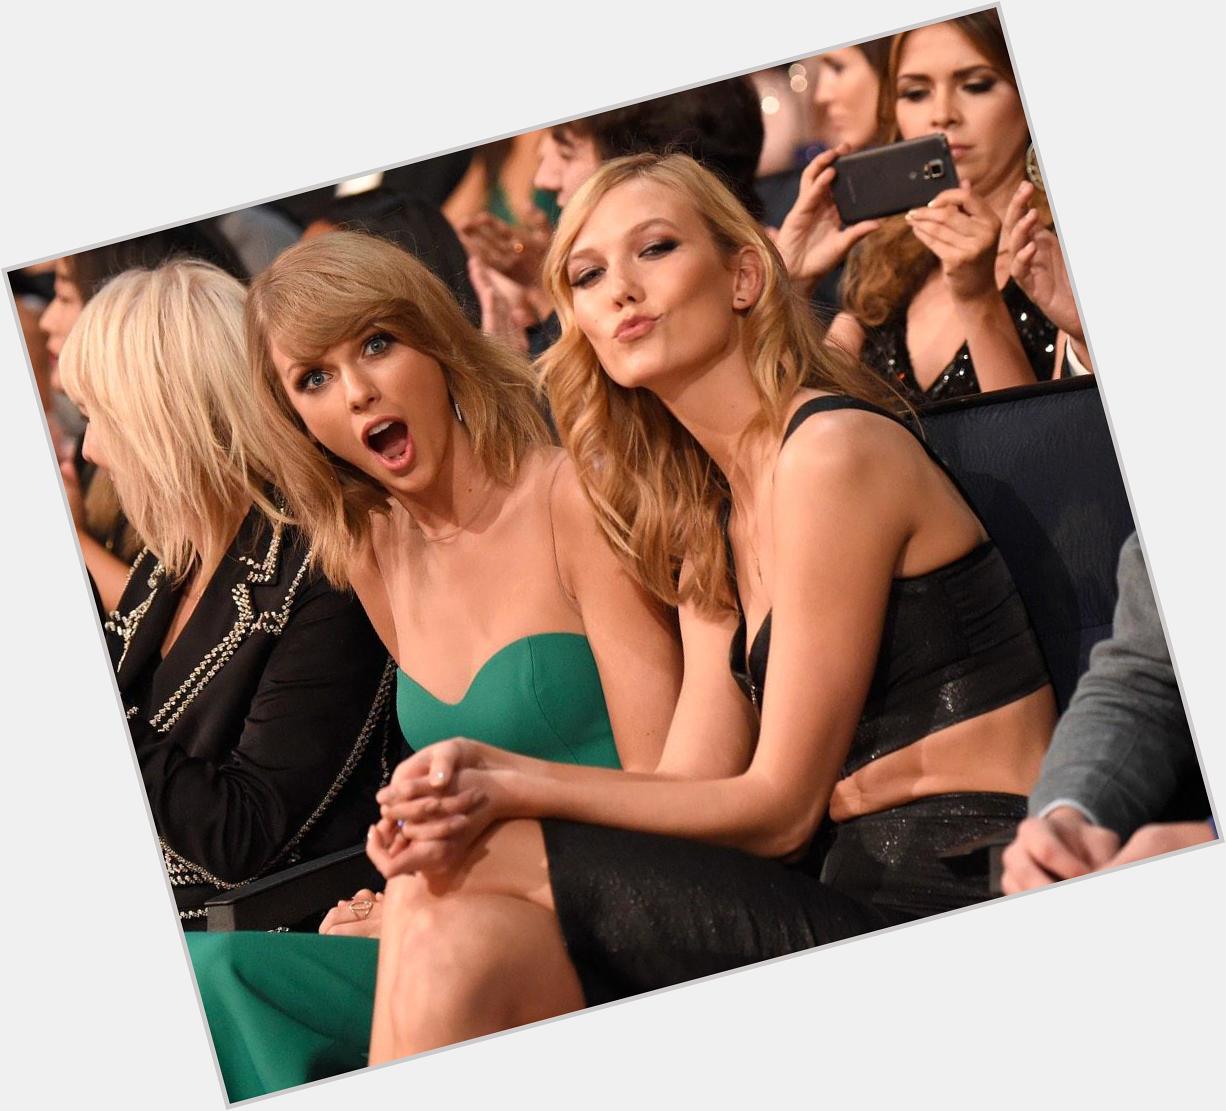 Happy Birthday to Taylor\s twin! We love you Karlie Kloss   